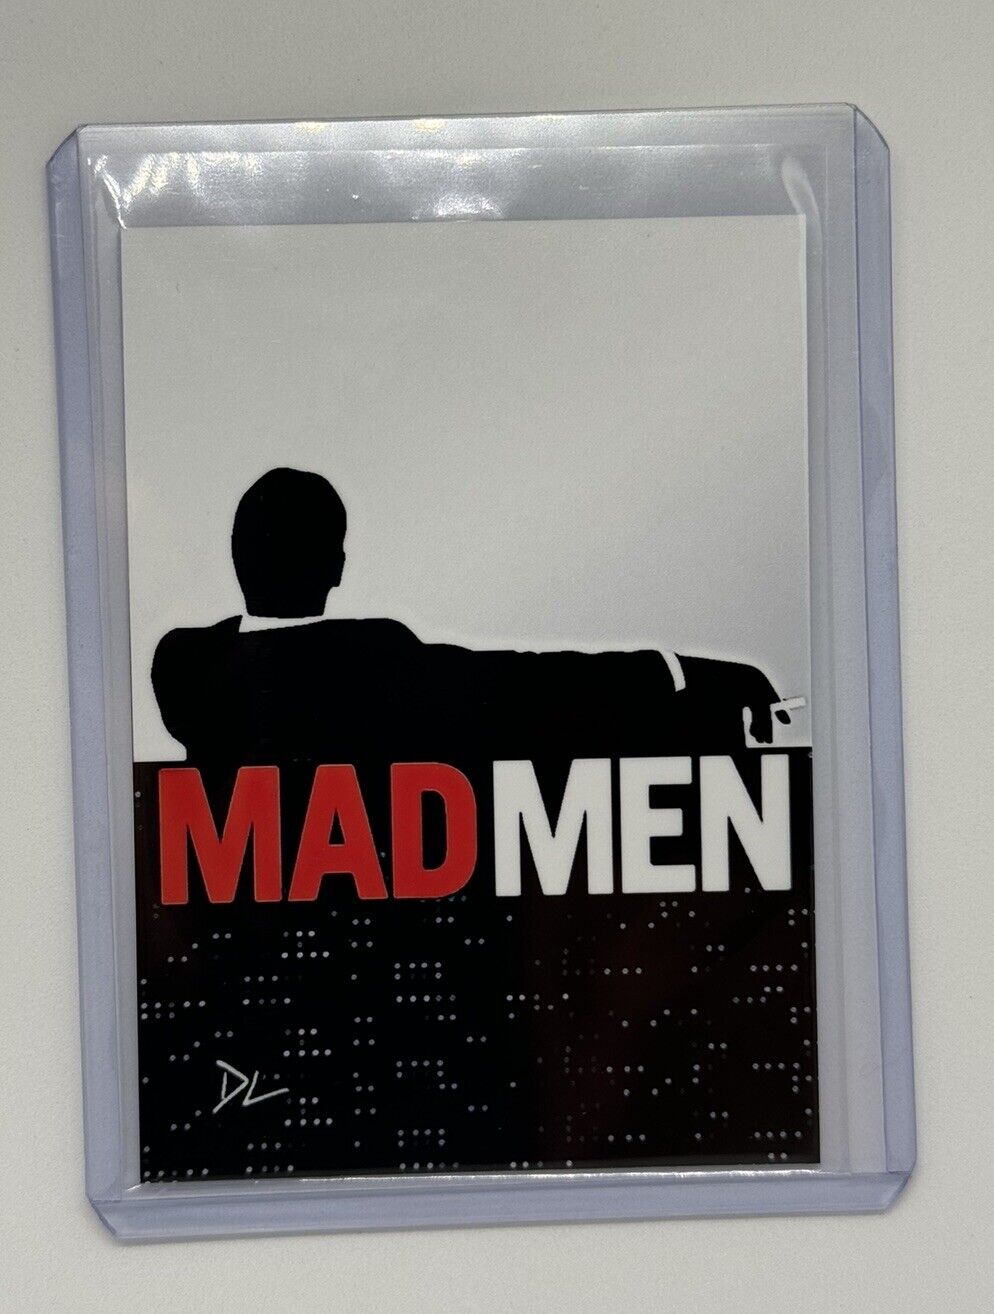 Mad Men Limited Edition Artist Signed “Don Draper” Trading Card 2/10